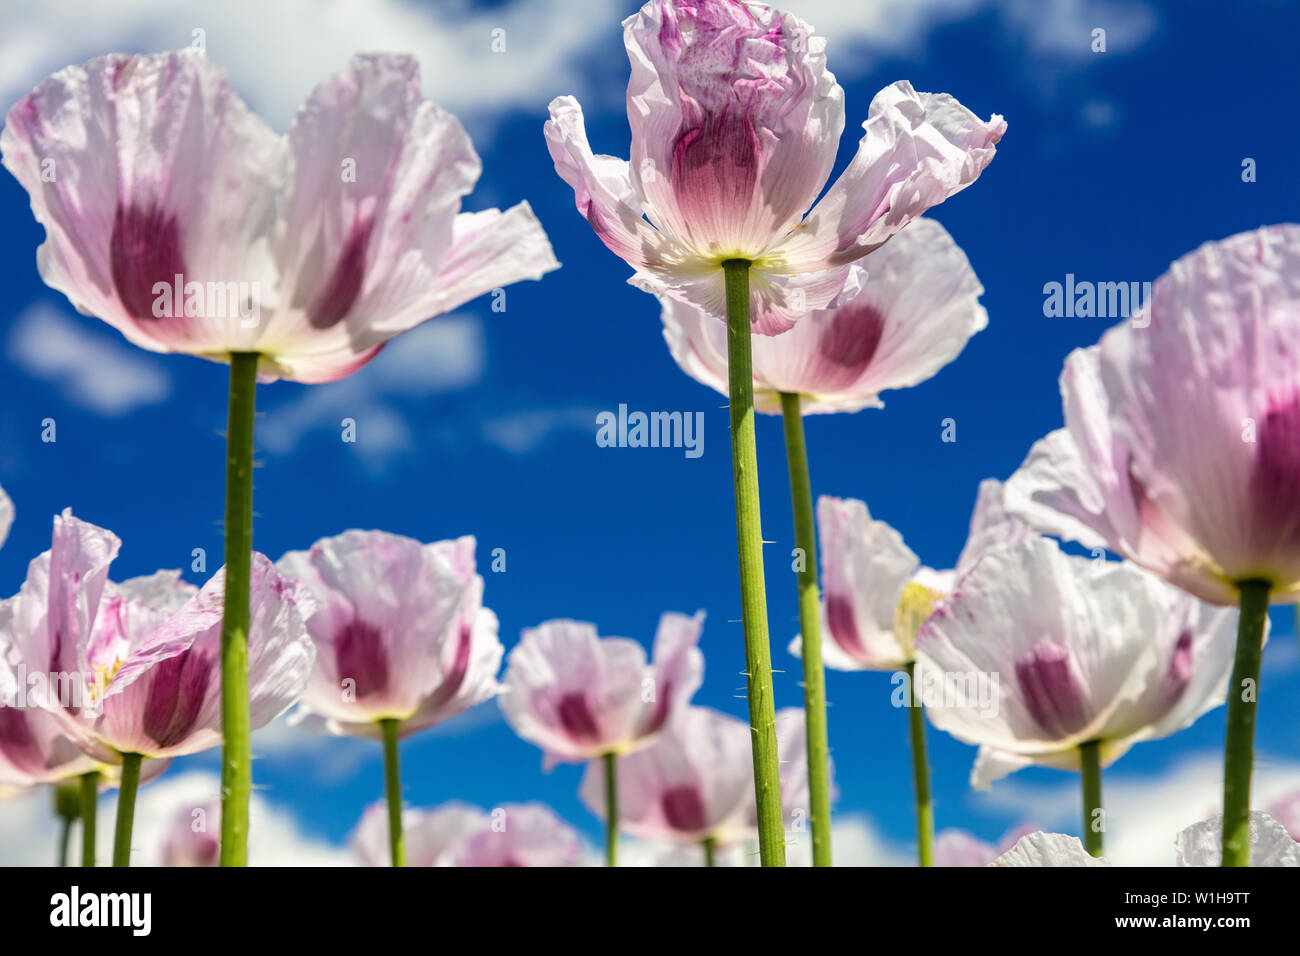 Close up photograph of pink poppies flowers growing in a summer field with bright blue sky and white clouds Stock Photo